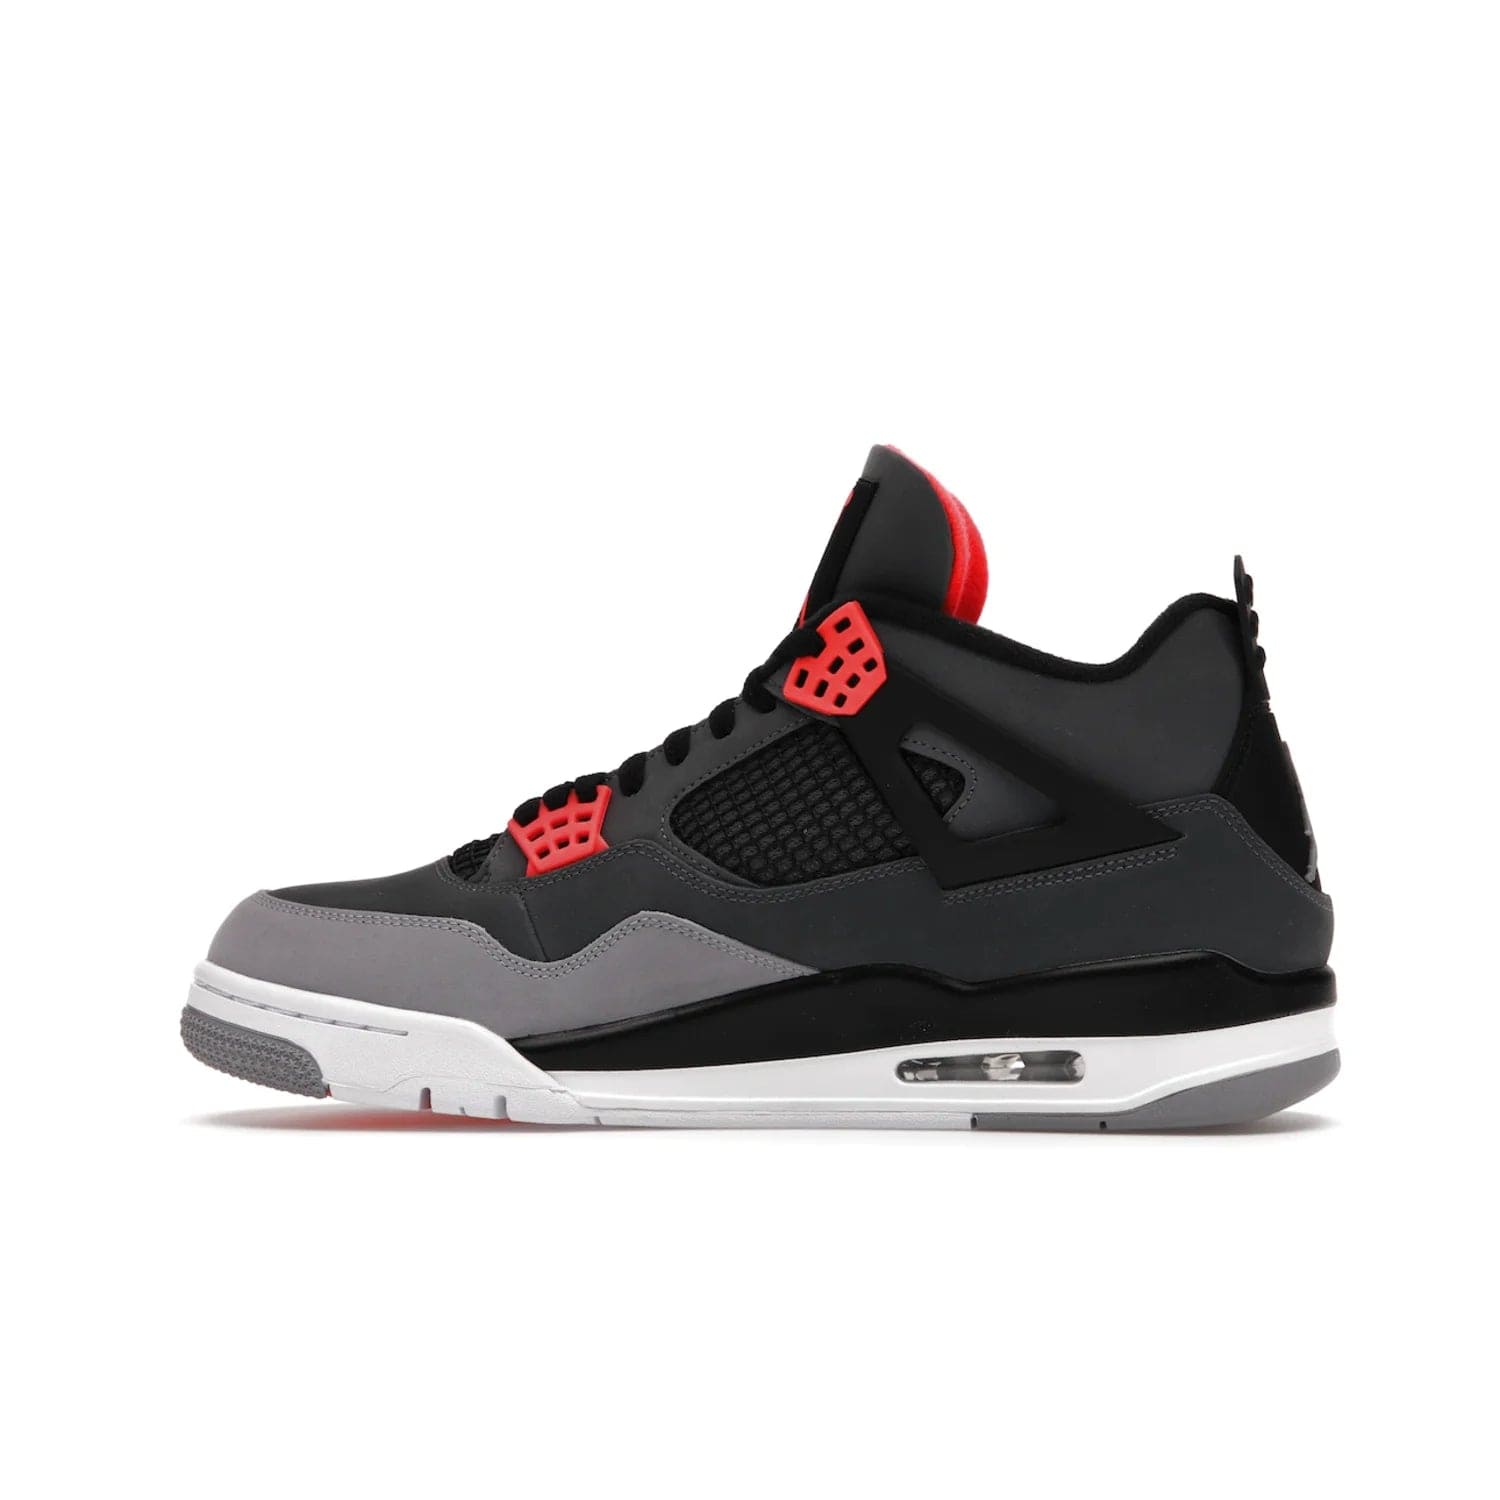 Jordan 4 Retro Infrared - Image 20 - Only at www.BallersClubKickz.com - Introducing the classic & timeless Air Jordan 4 Infrared. Durabuck upper, TPU mesh inserts, tech straps & heel tabs in dark grey and infrared accents. White sole with visible Air units. Out June 15, 2022. Get your pair now!